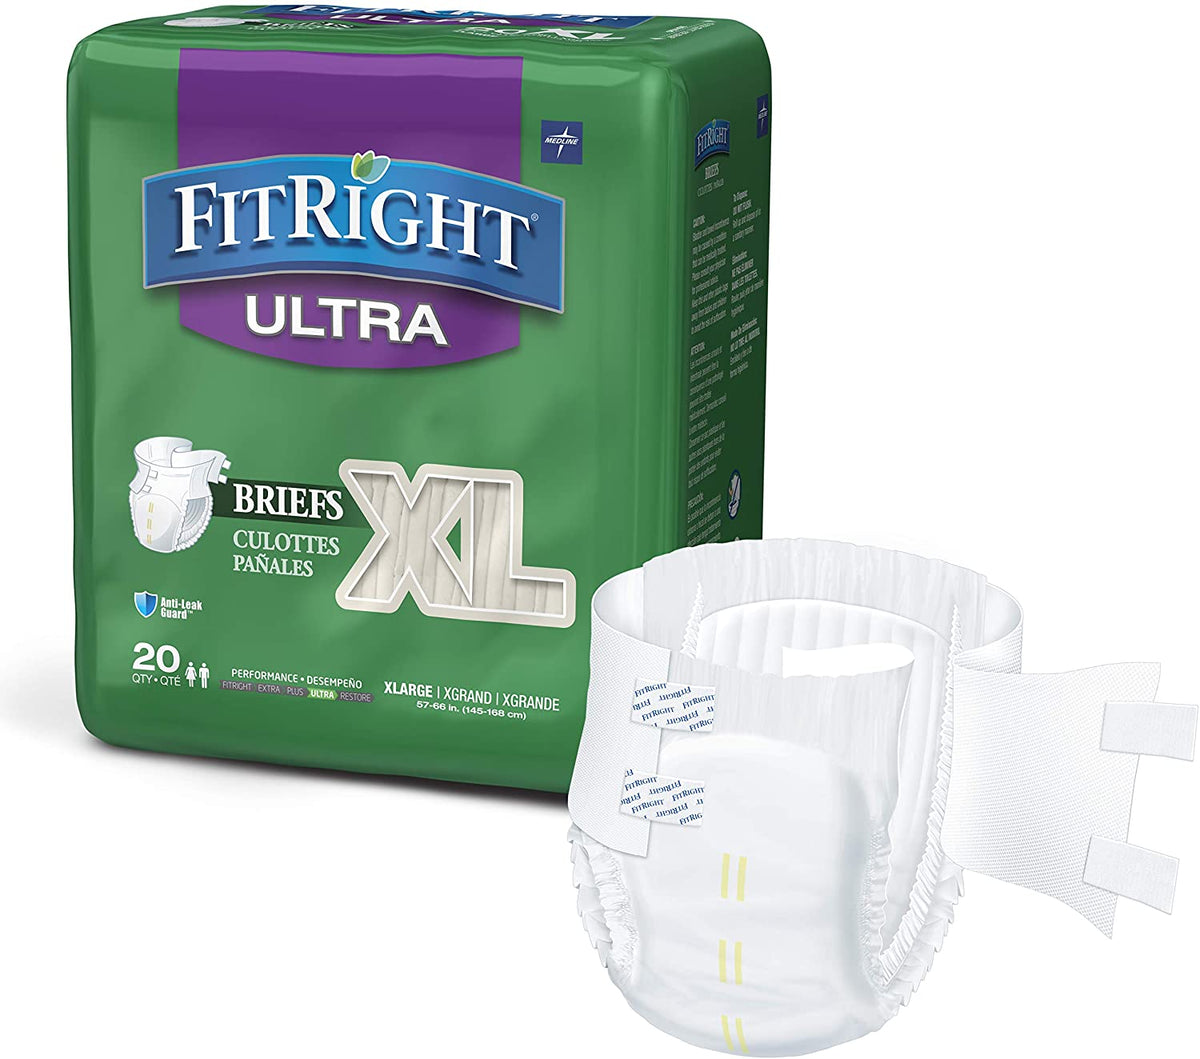 FitRight Restore Super Incontinence Briefs Adult Diapers with Tabs